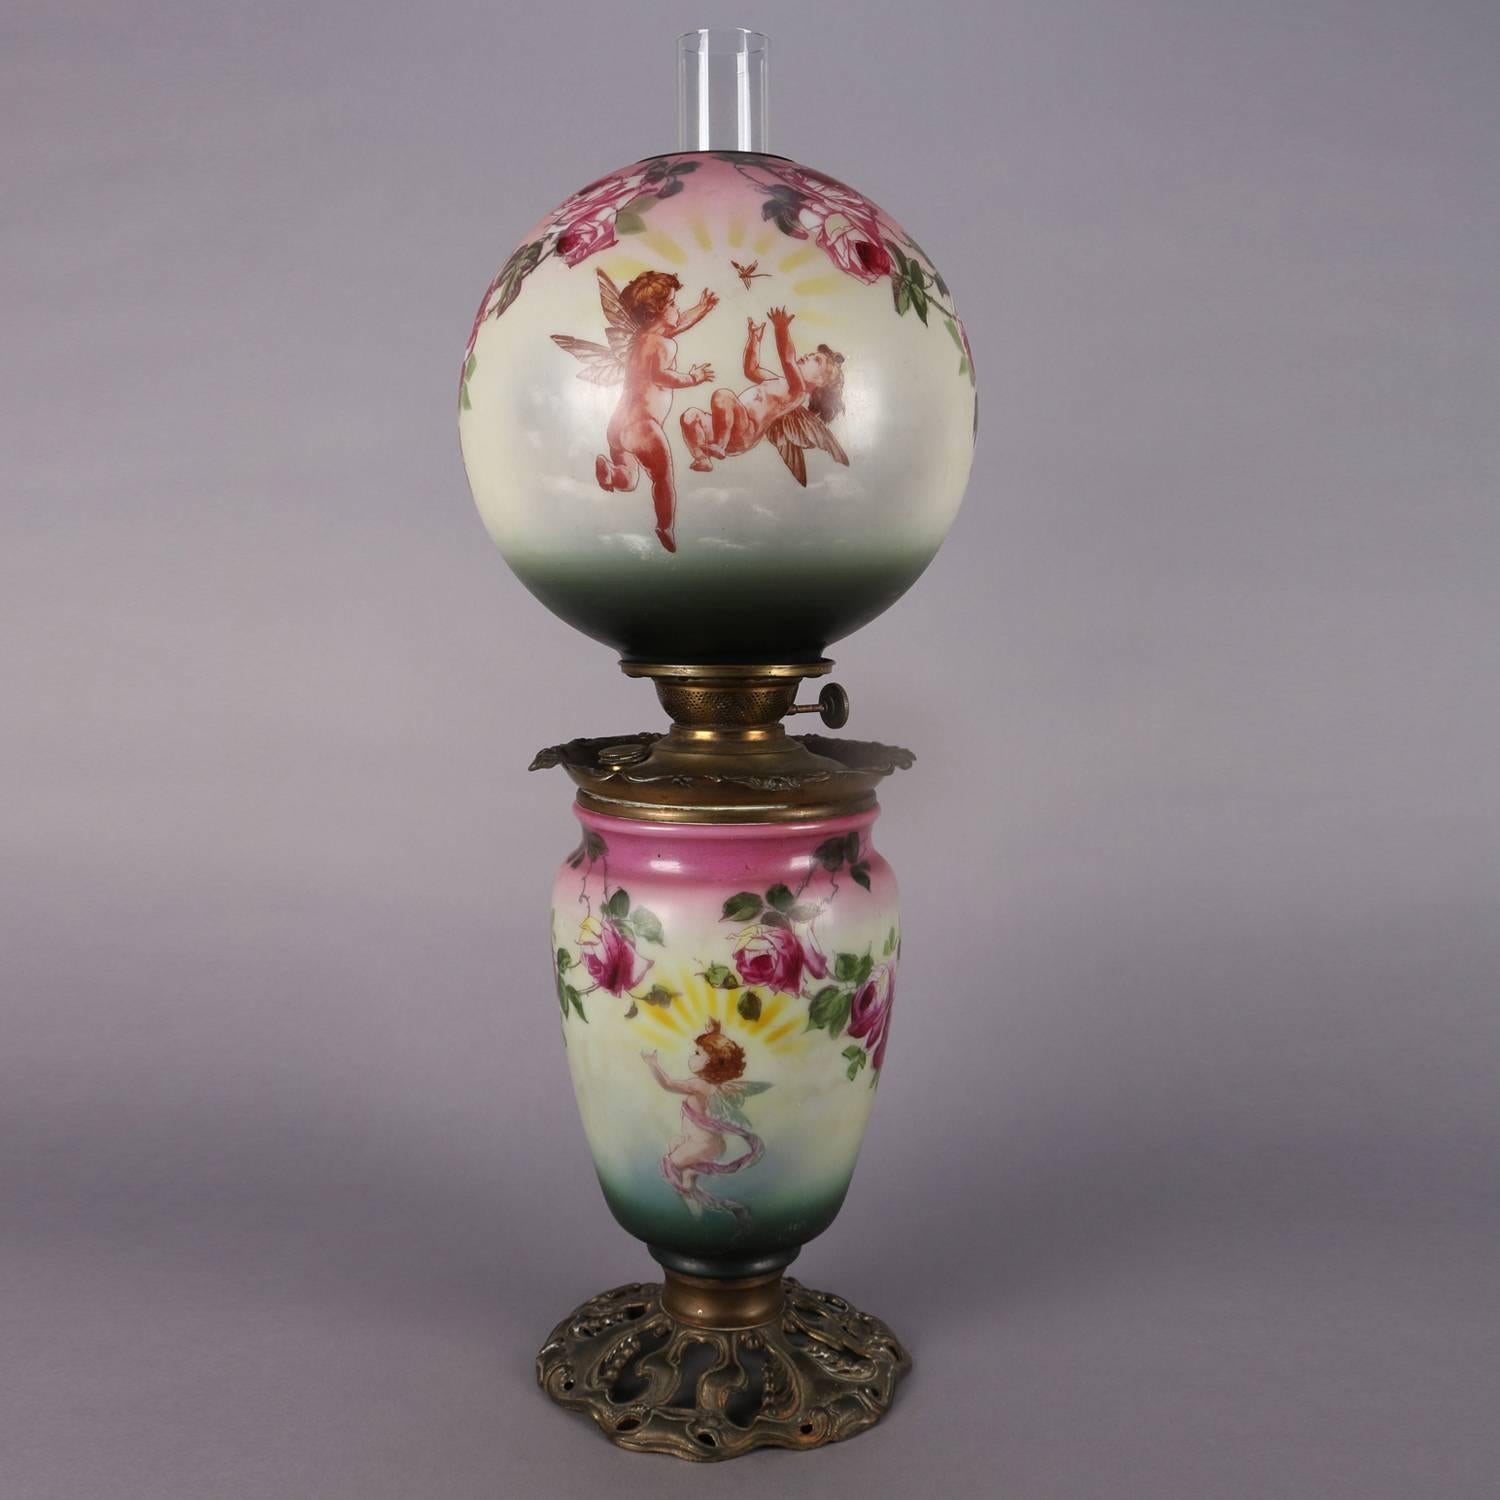 Classical Victorian Gone-with-the-wind oil lamp has hand-painted Classical scene including cherubs and rose garland, circa 1890.

Measures: 27